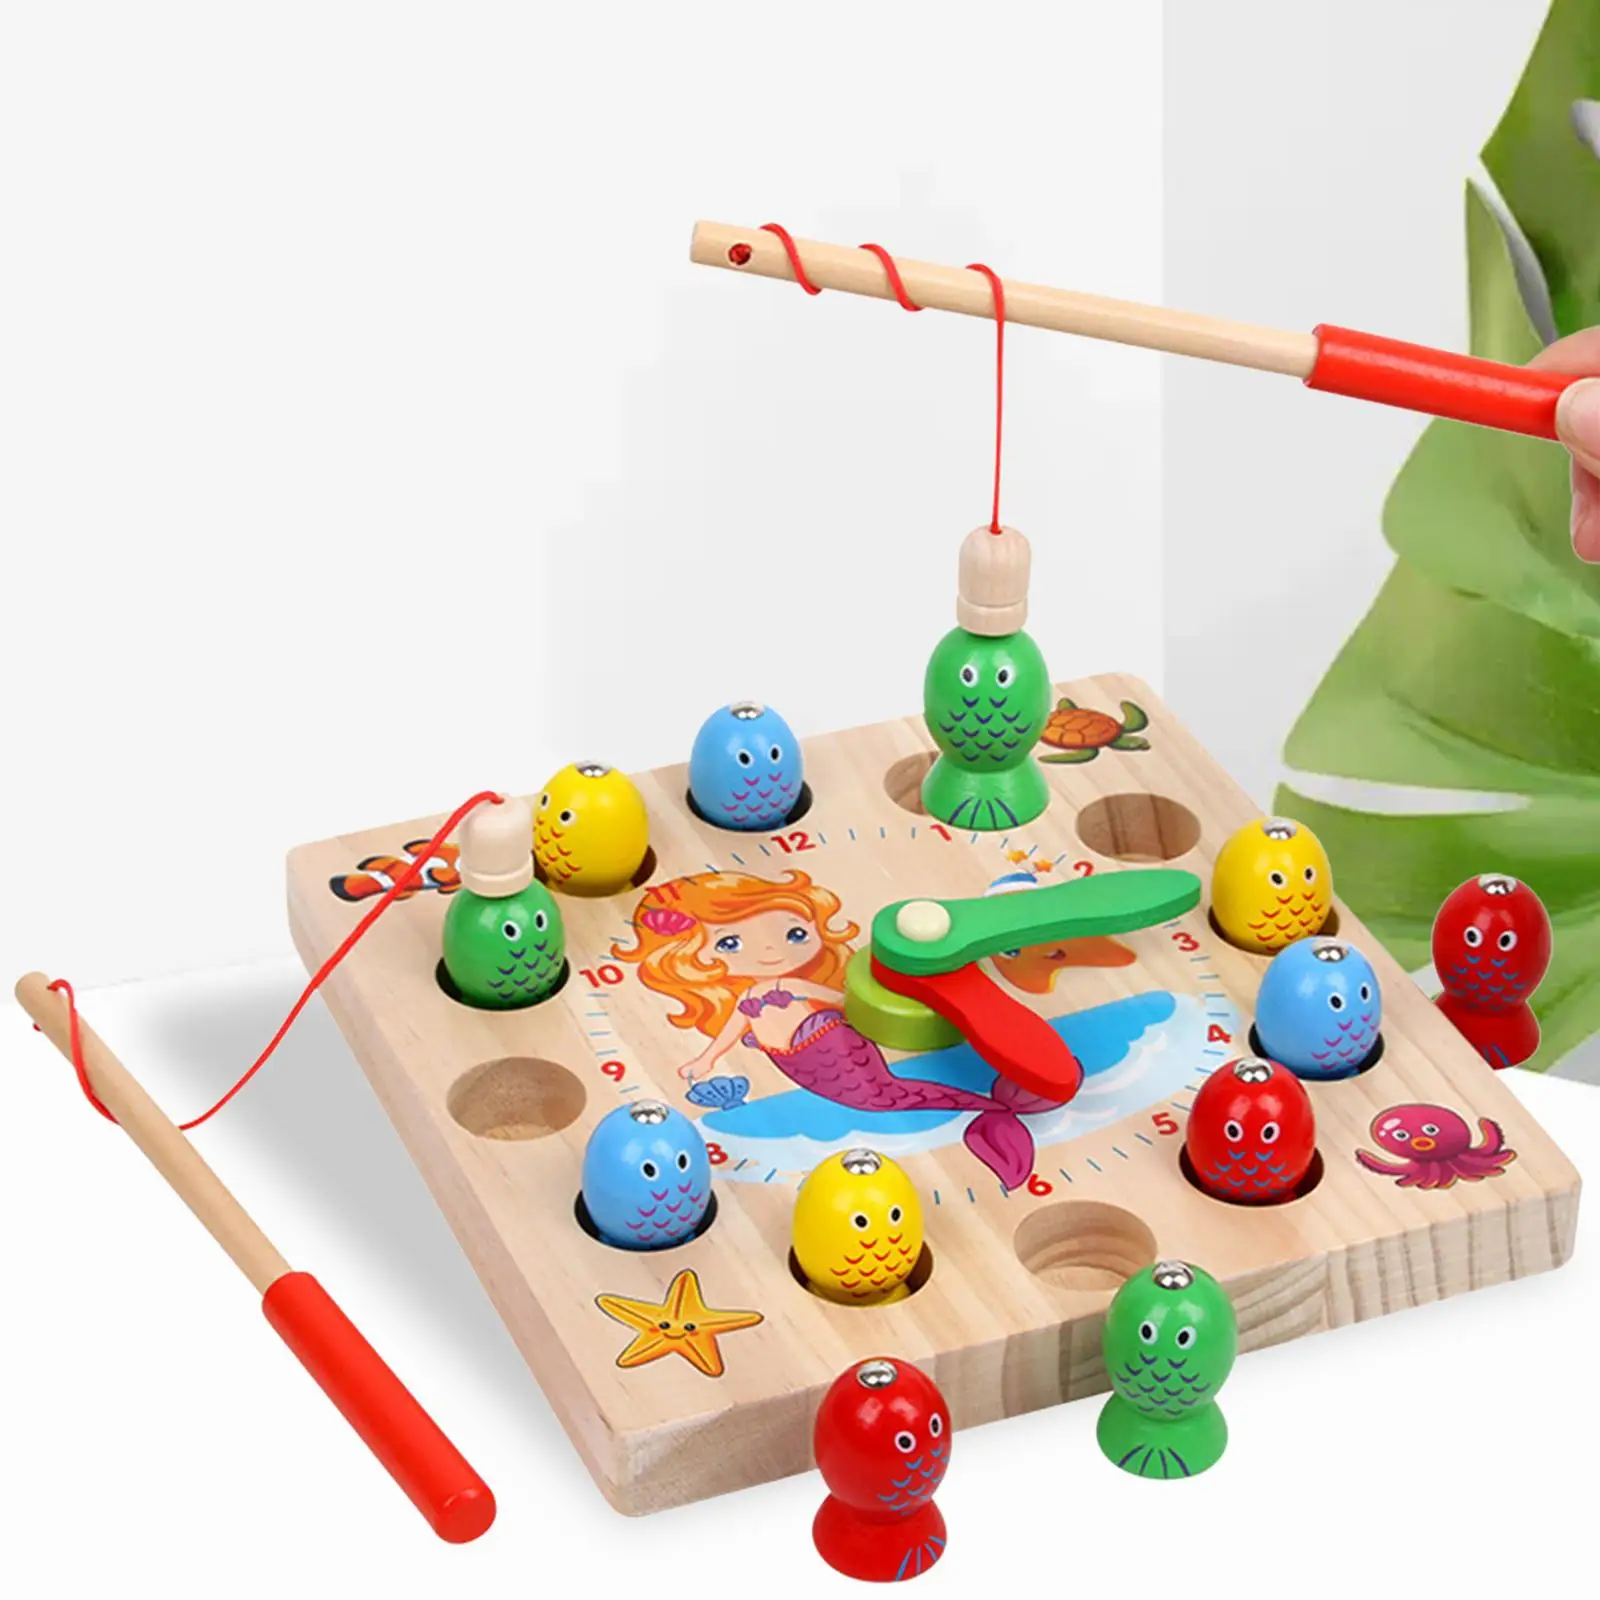 Wooden Fishing Game Toy Motor Skills Preschool Learning for 3 4 5 Year Old Birthday Gifts